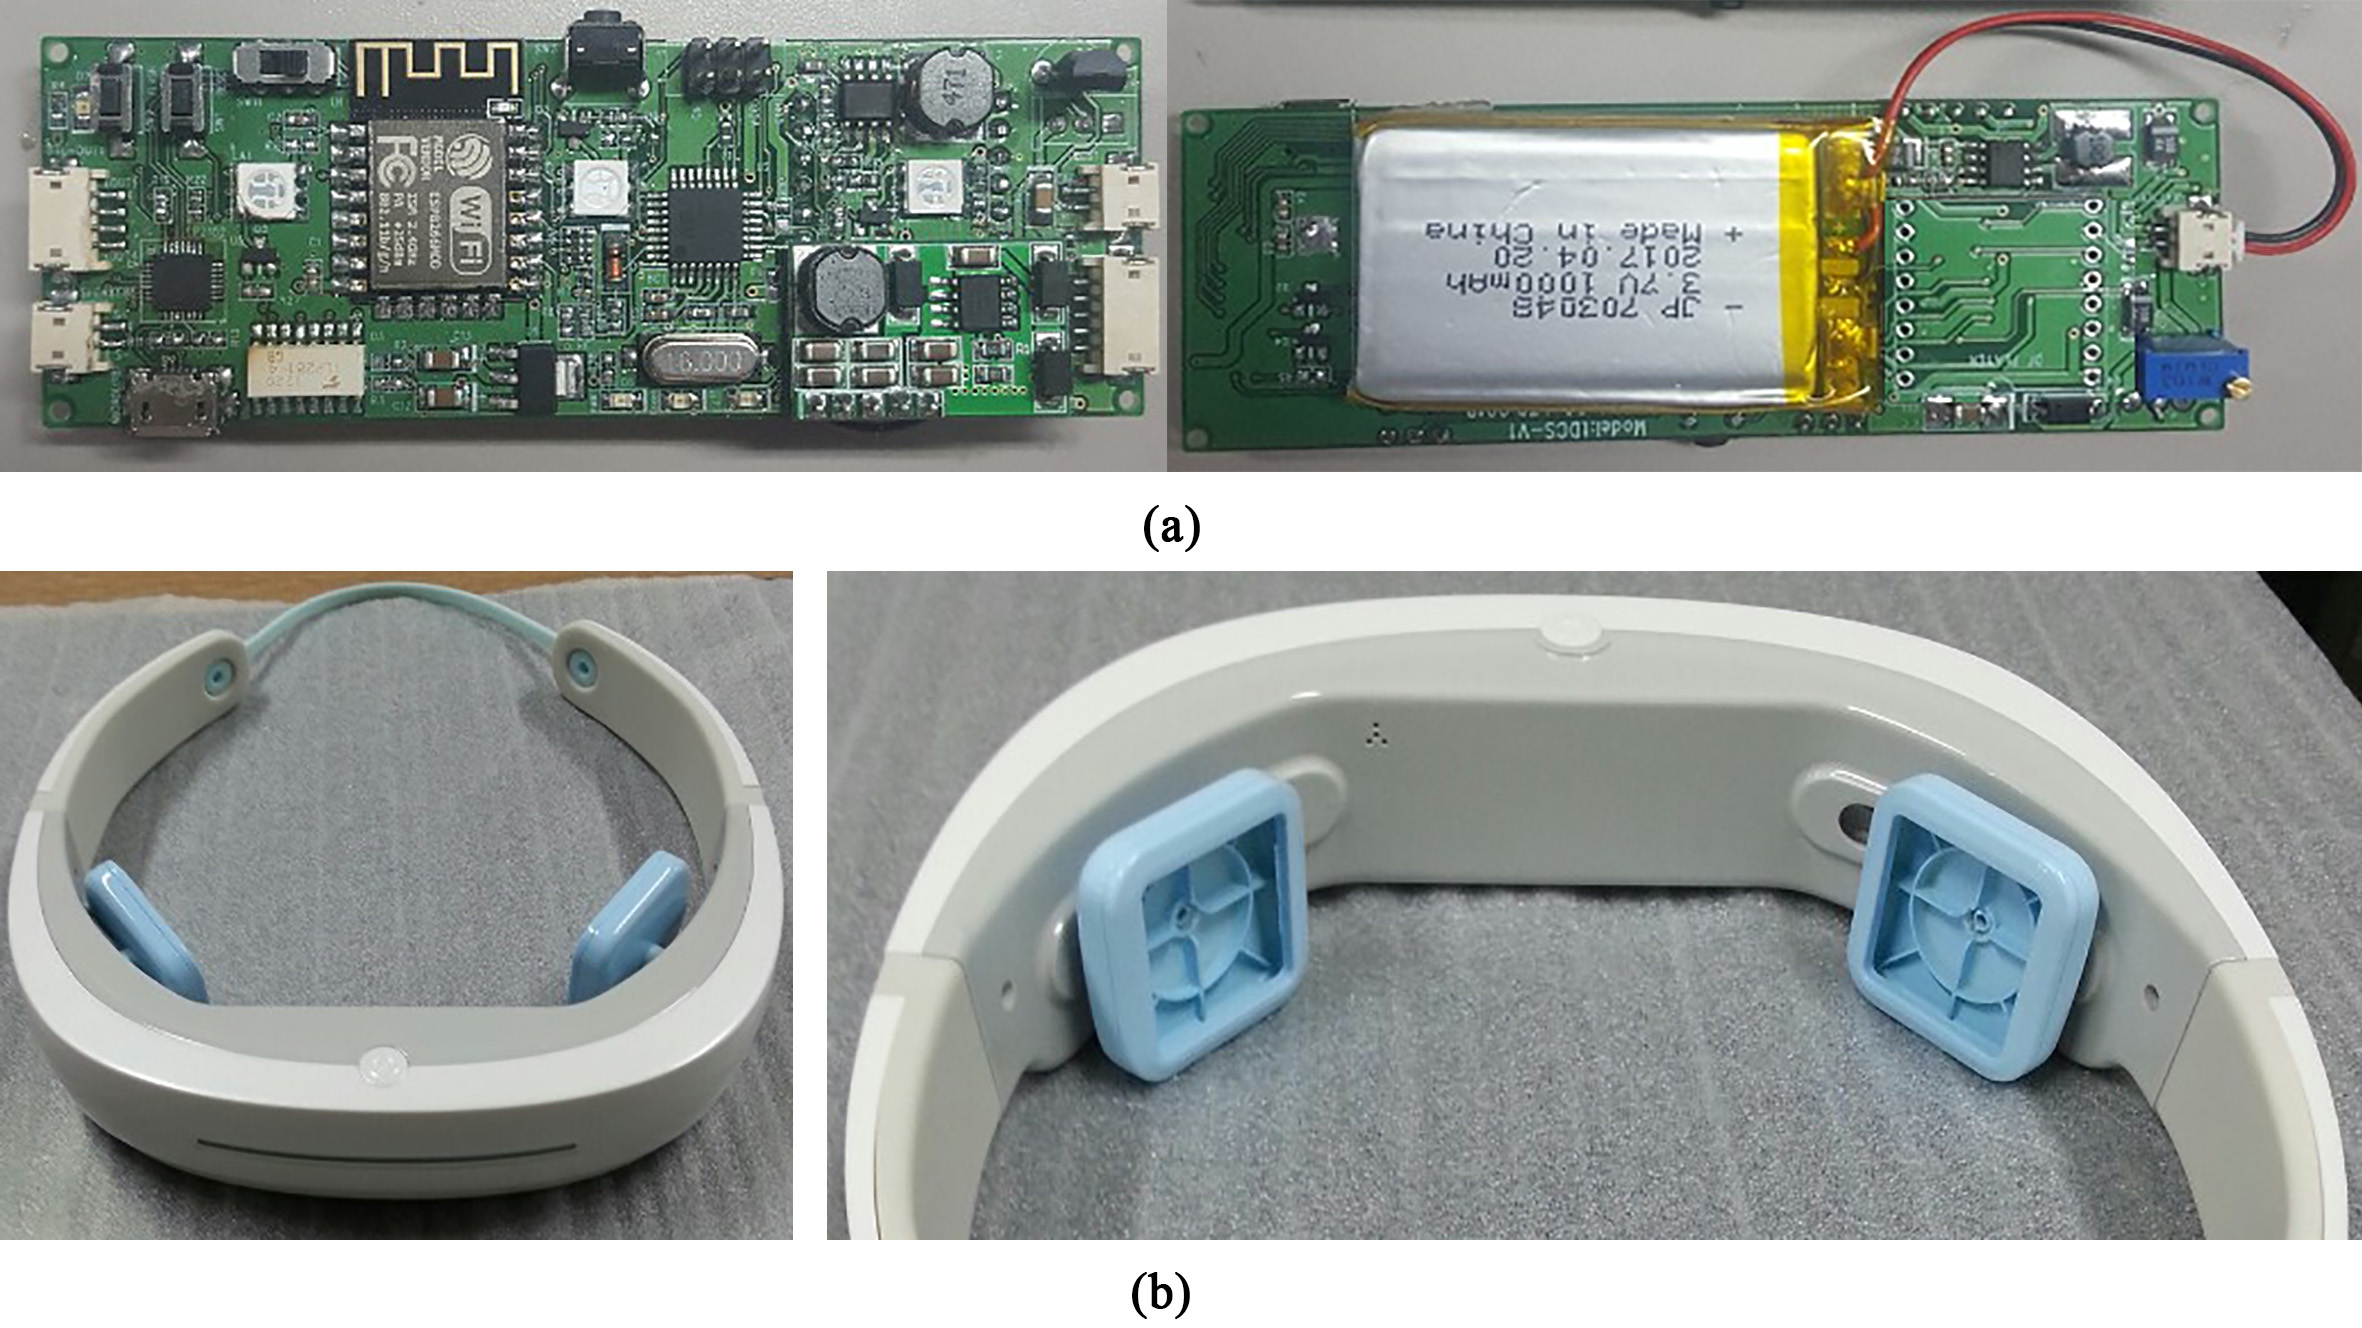 Developed tDCS device: (a) main controller, and (b) assembled device.